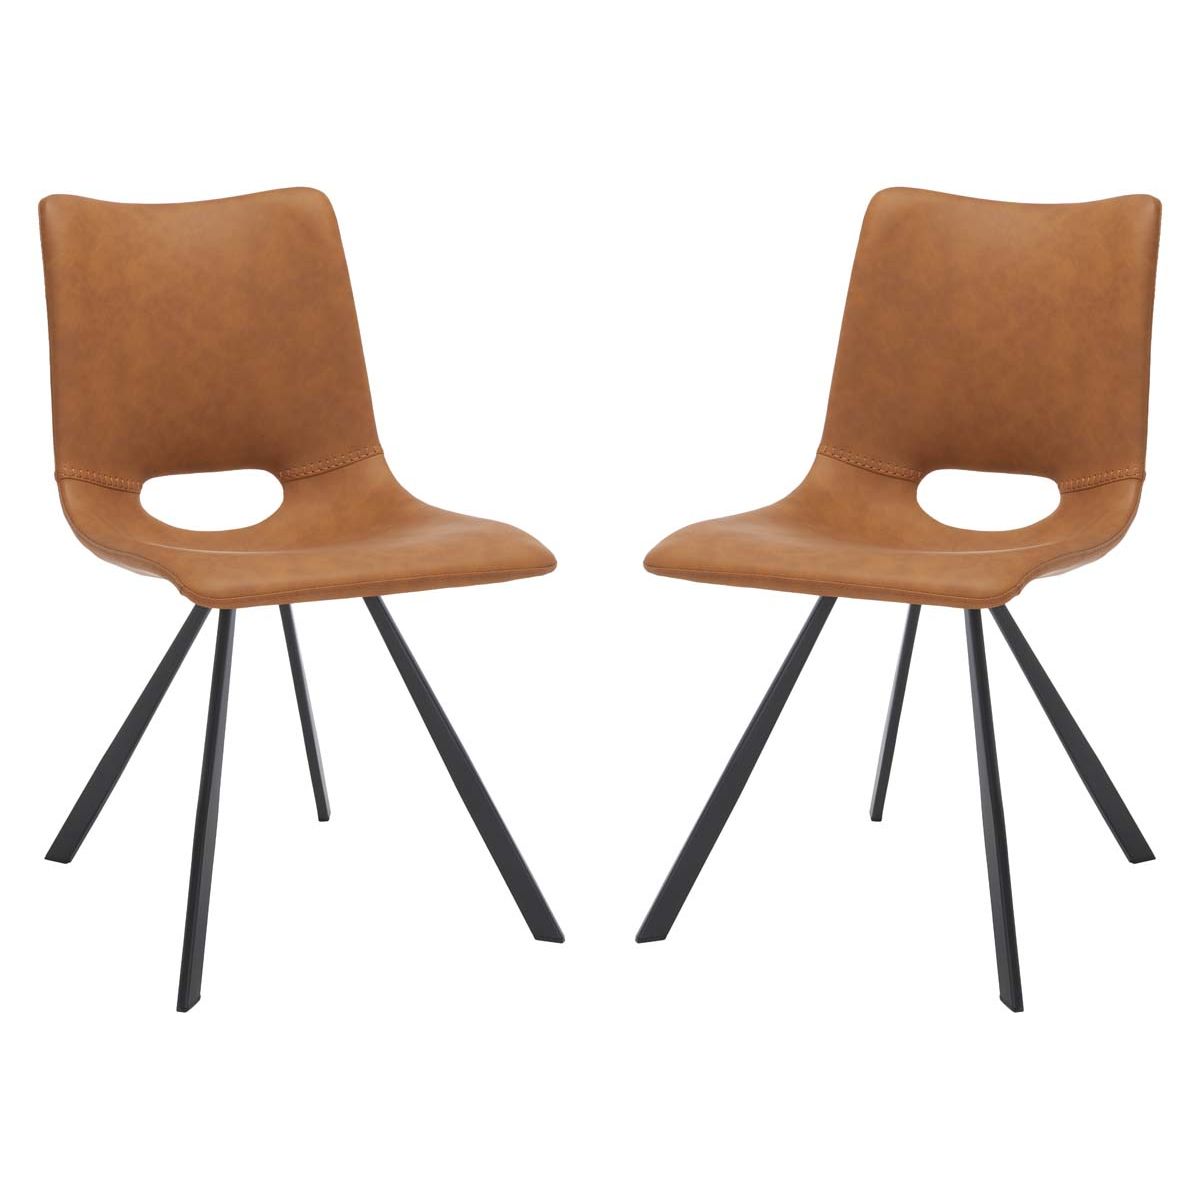 Safavieh Mika Dining Chair (Set of 2) , DCH3009 - Cigar Brown